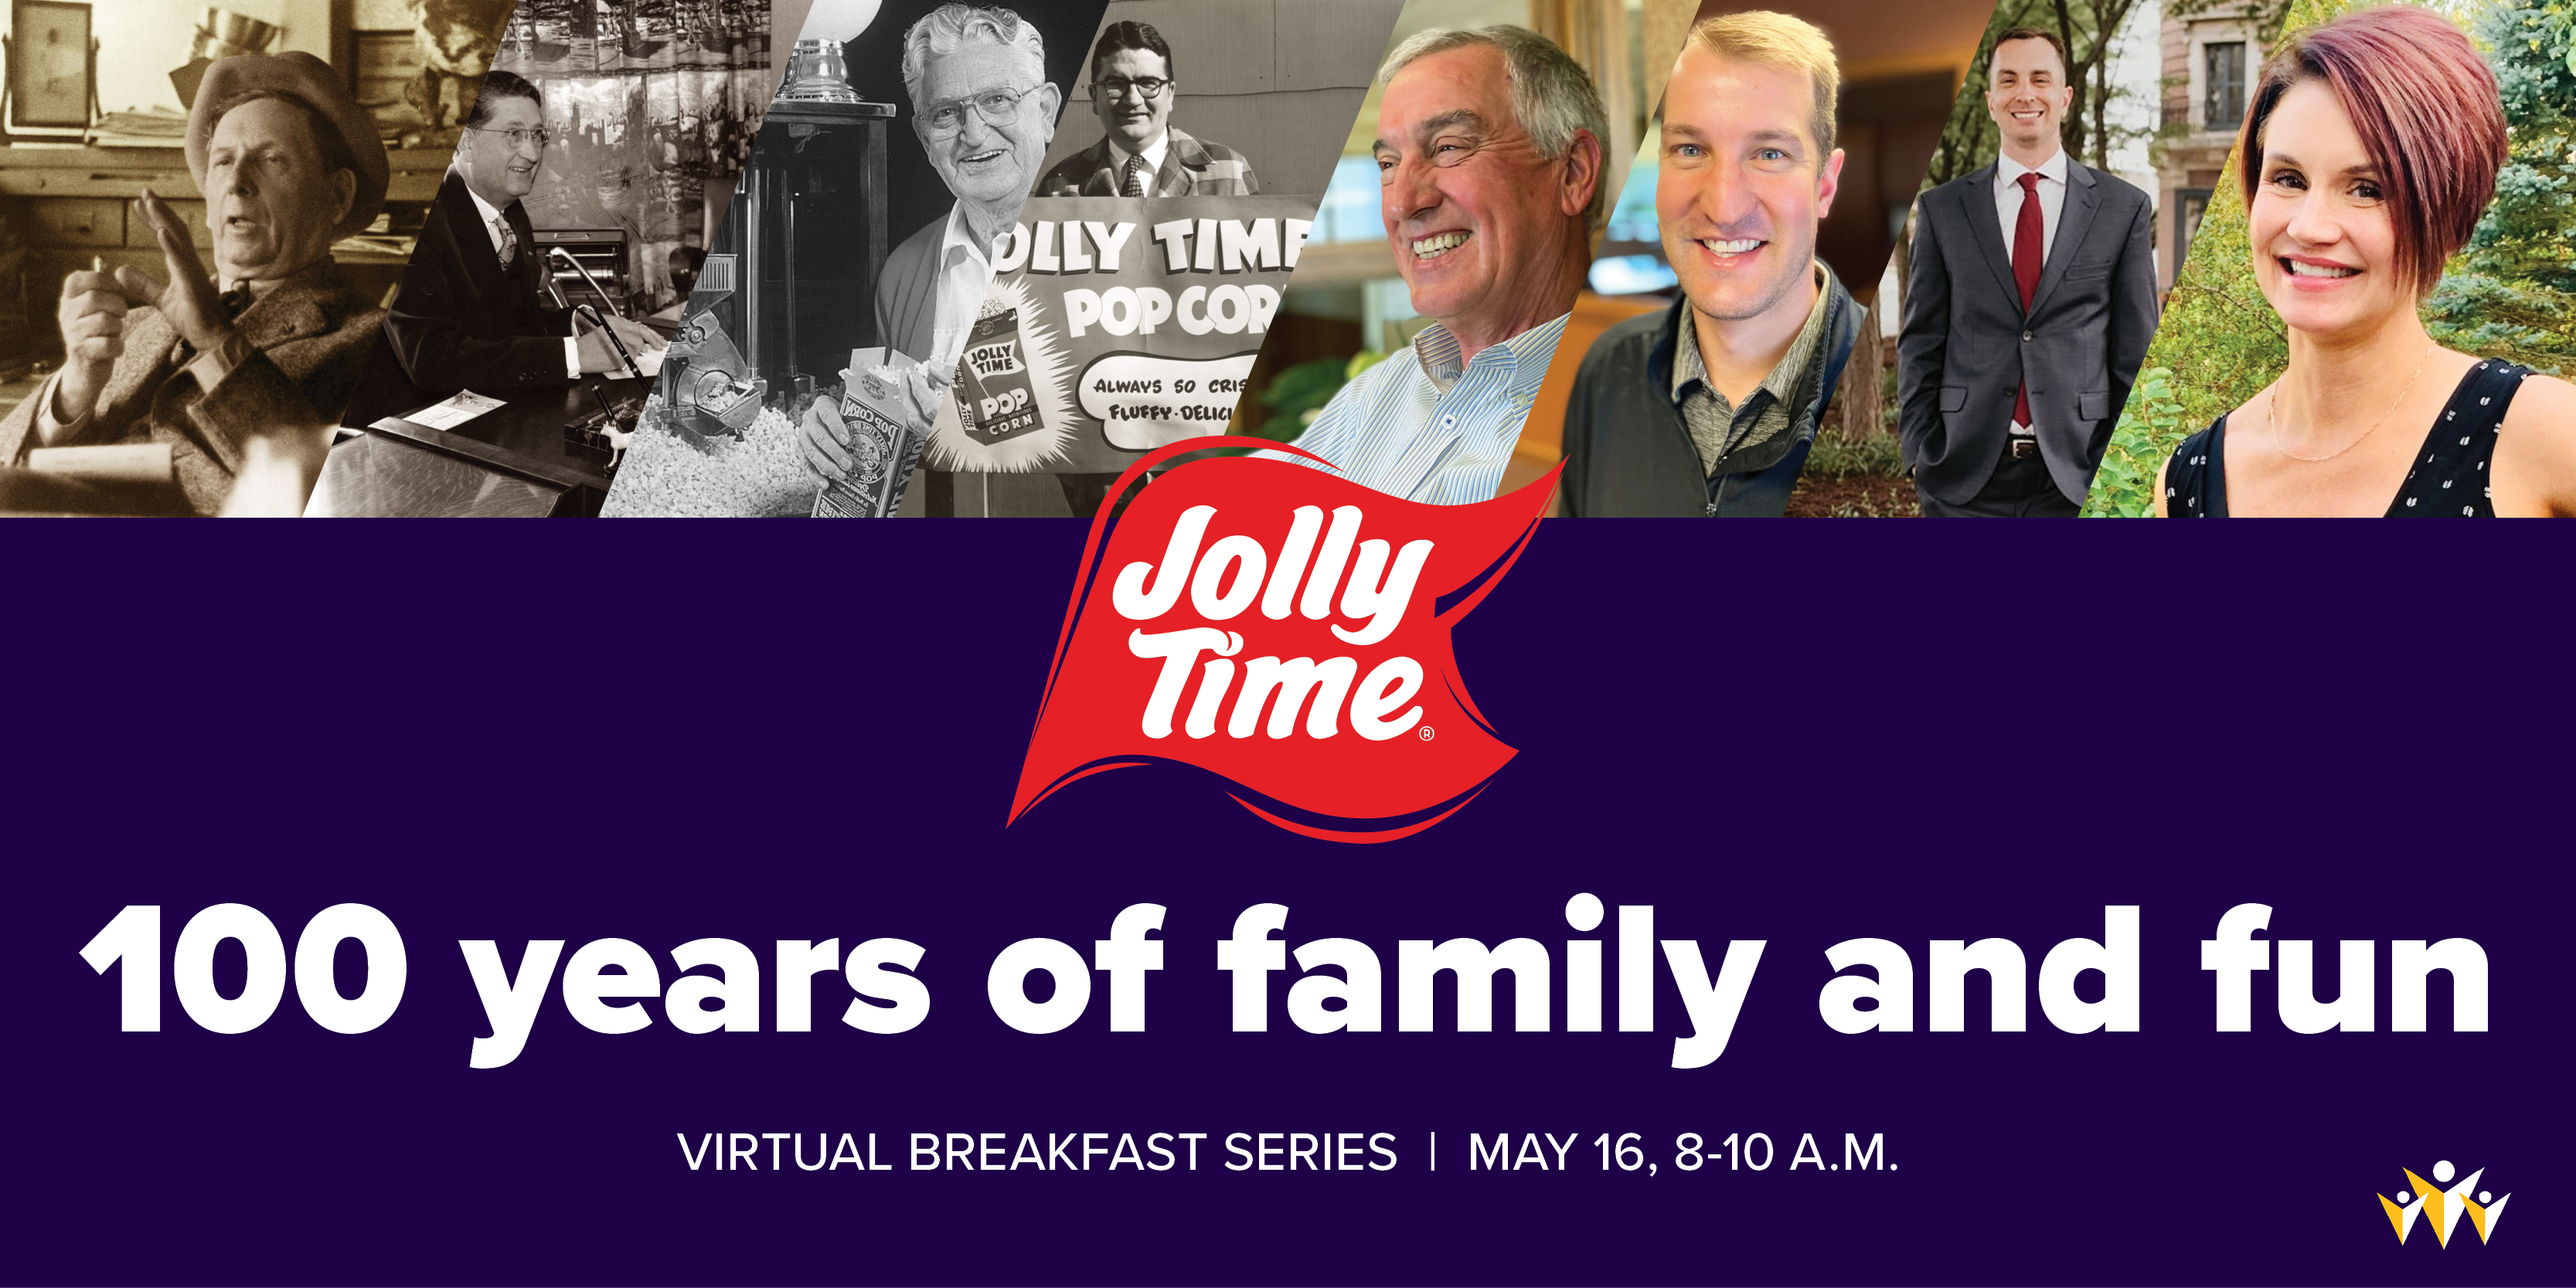 Jolly Time 100 years of family and fun virtual breakfast series May 16 8-10 a.m.